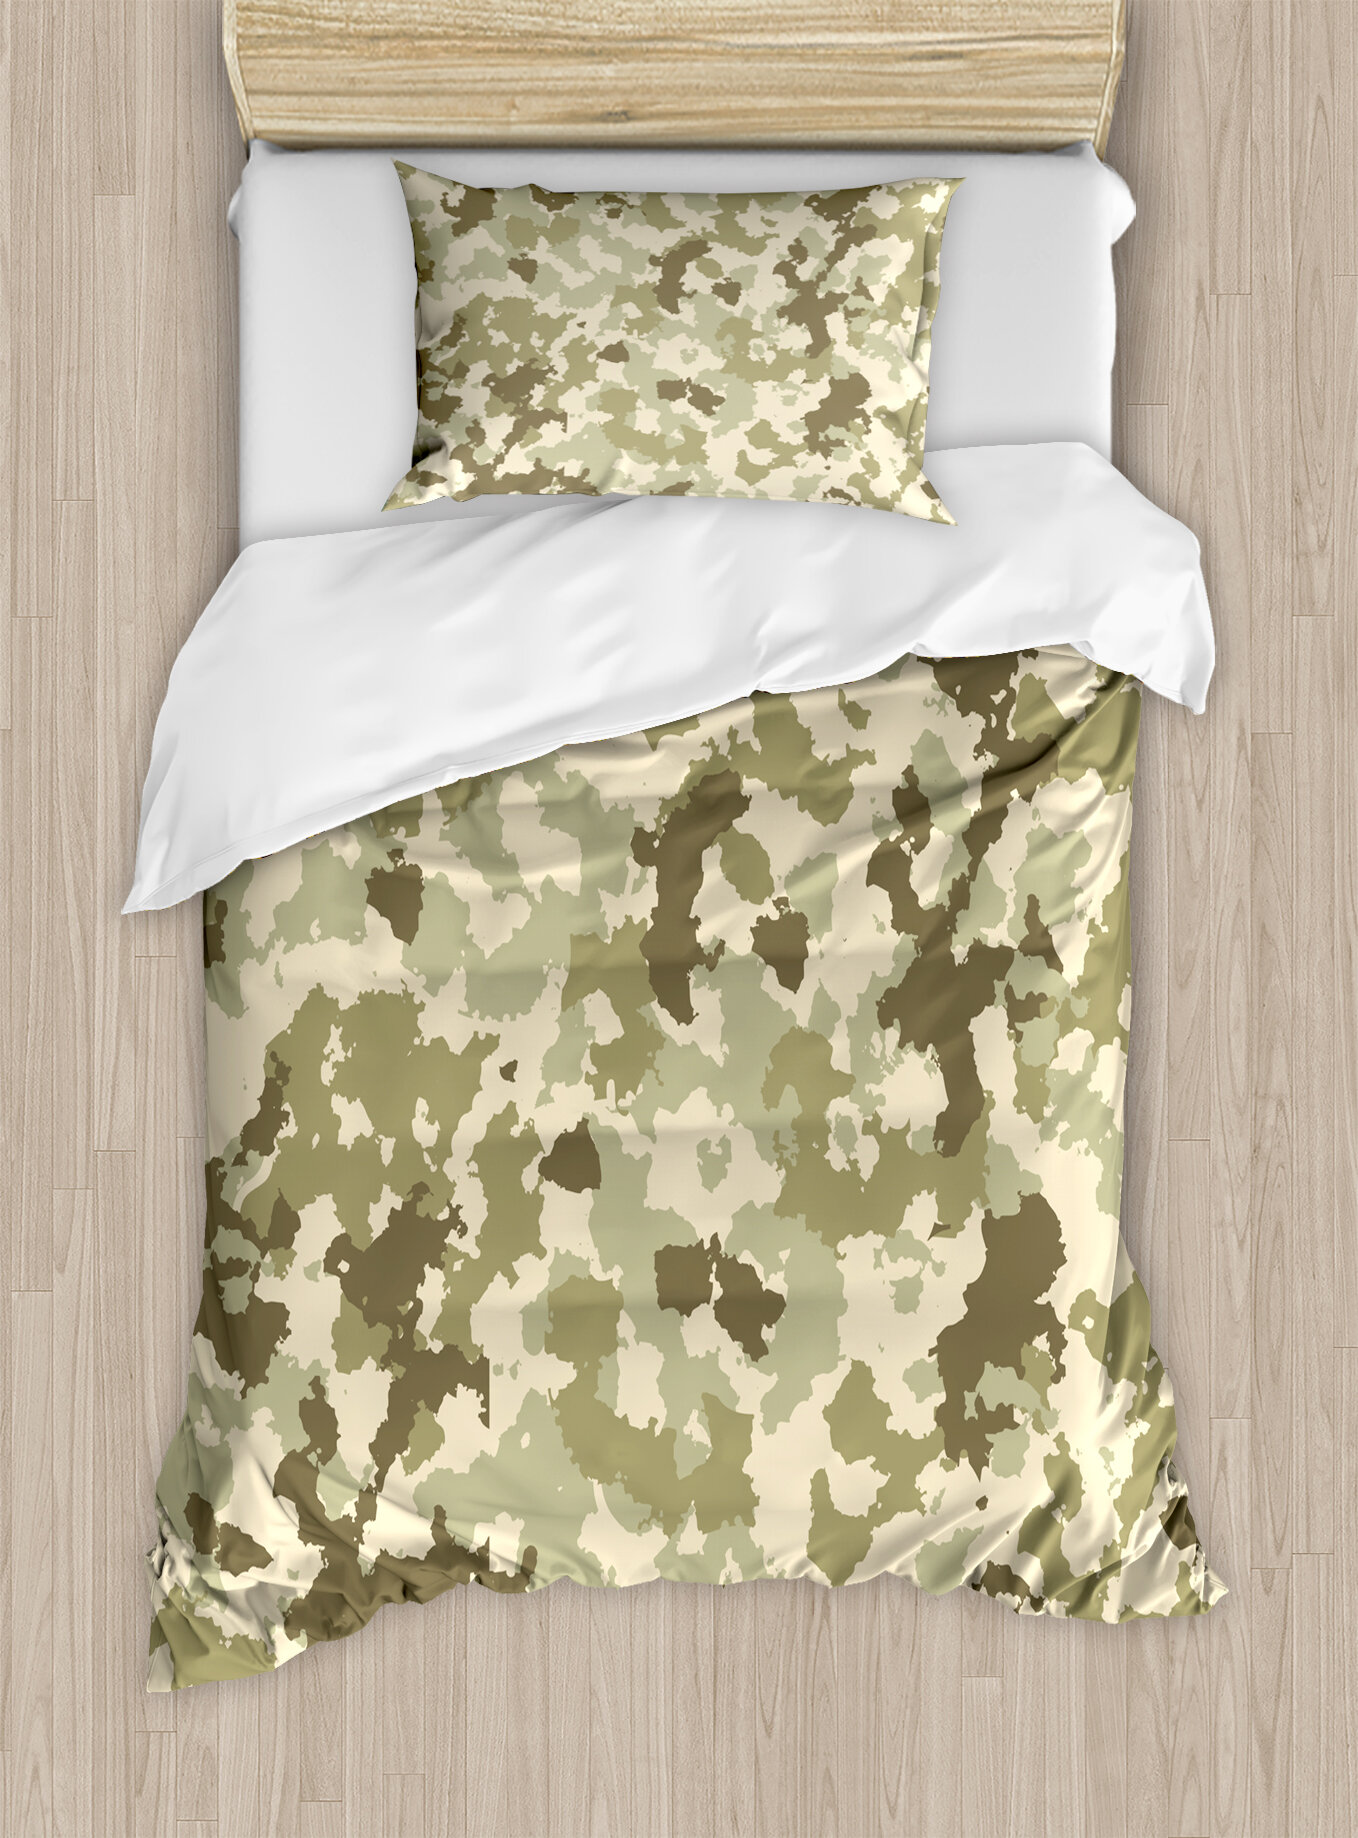 East Urban Home Camo Old Fashioned Camouflage Pattern Classical